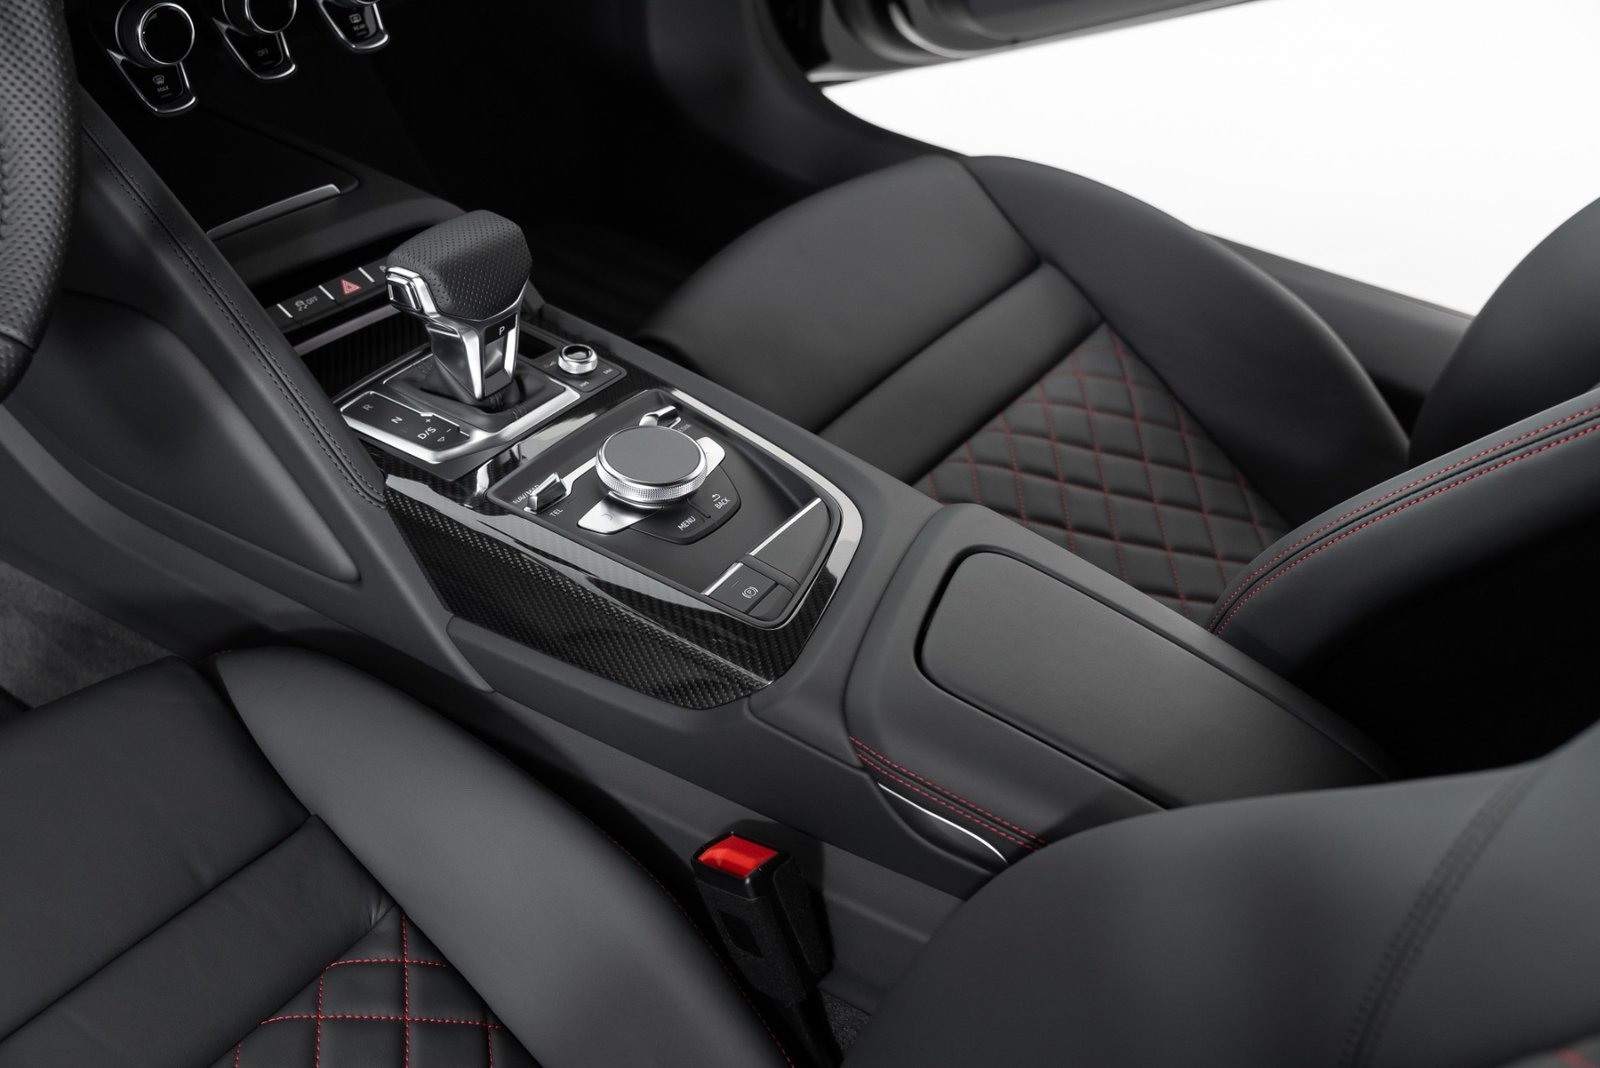 New 2023 AUDI R8 COUPE V10 PERFORMANCE ALL WHEEL DRIVE (11)